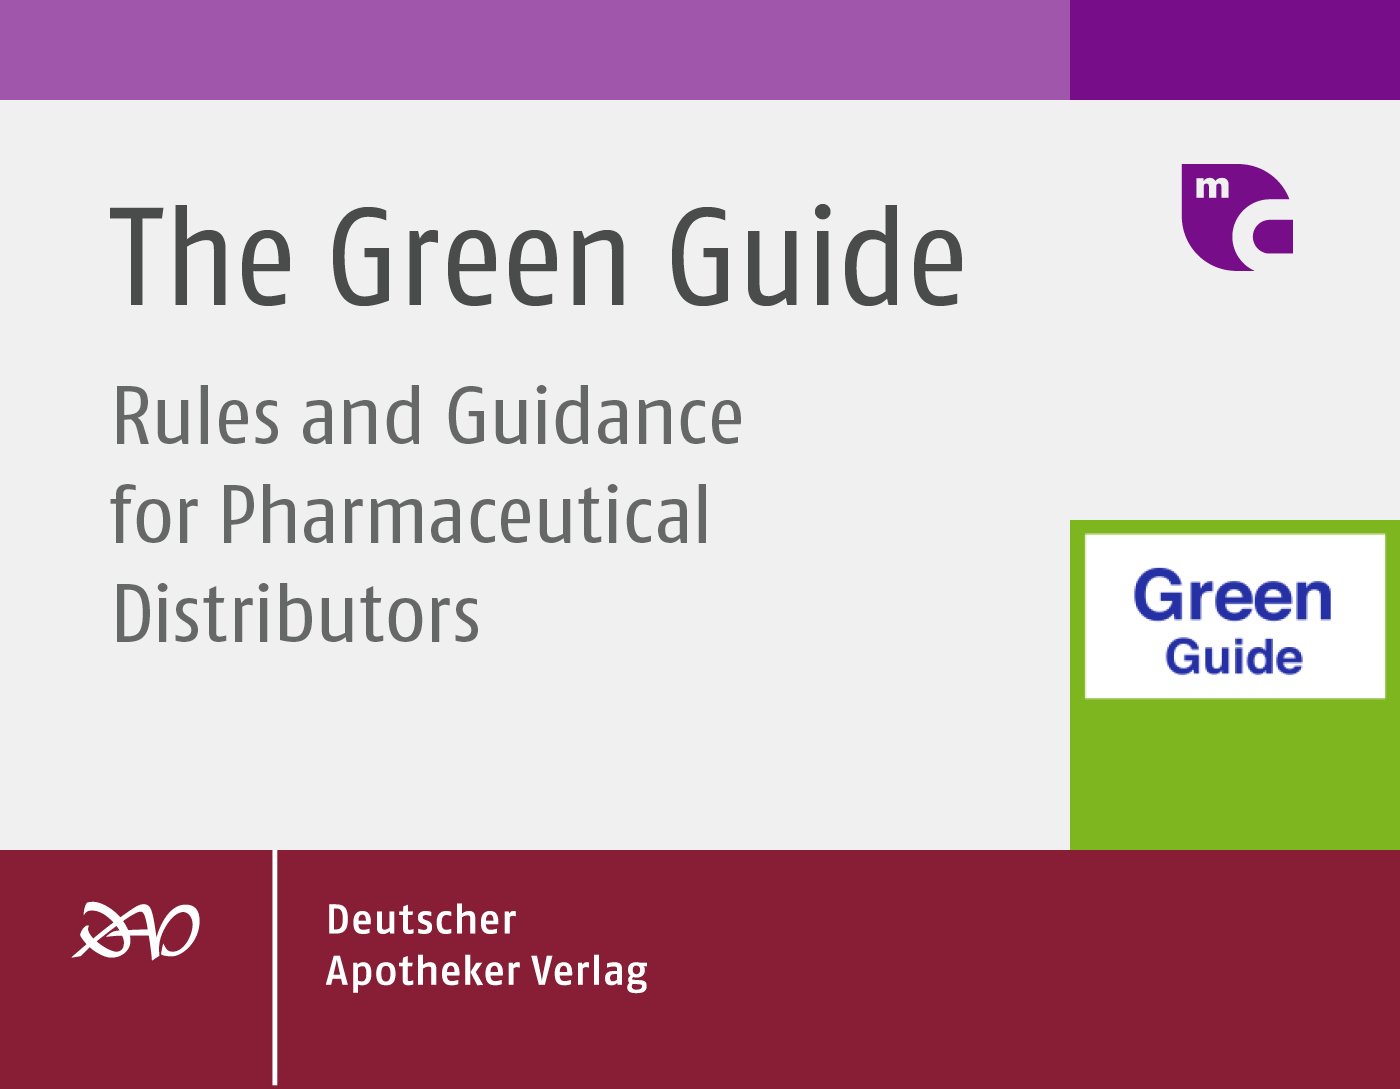 The Green Guide: Rules and Guidance for Pharmaceutical Distributors